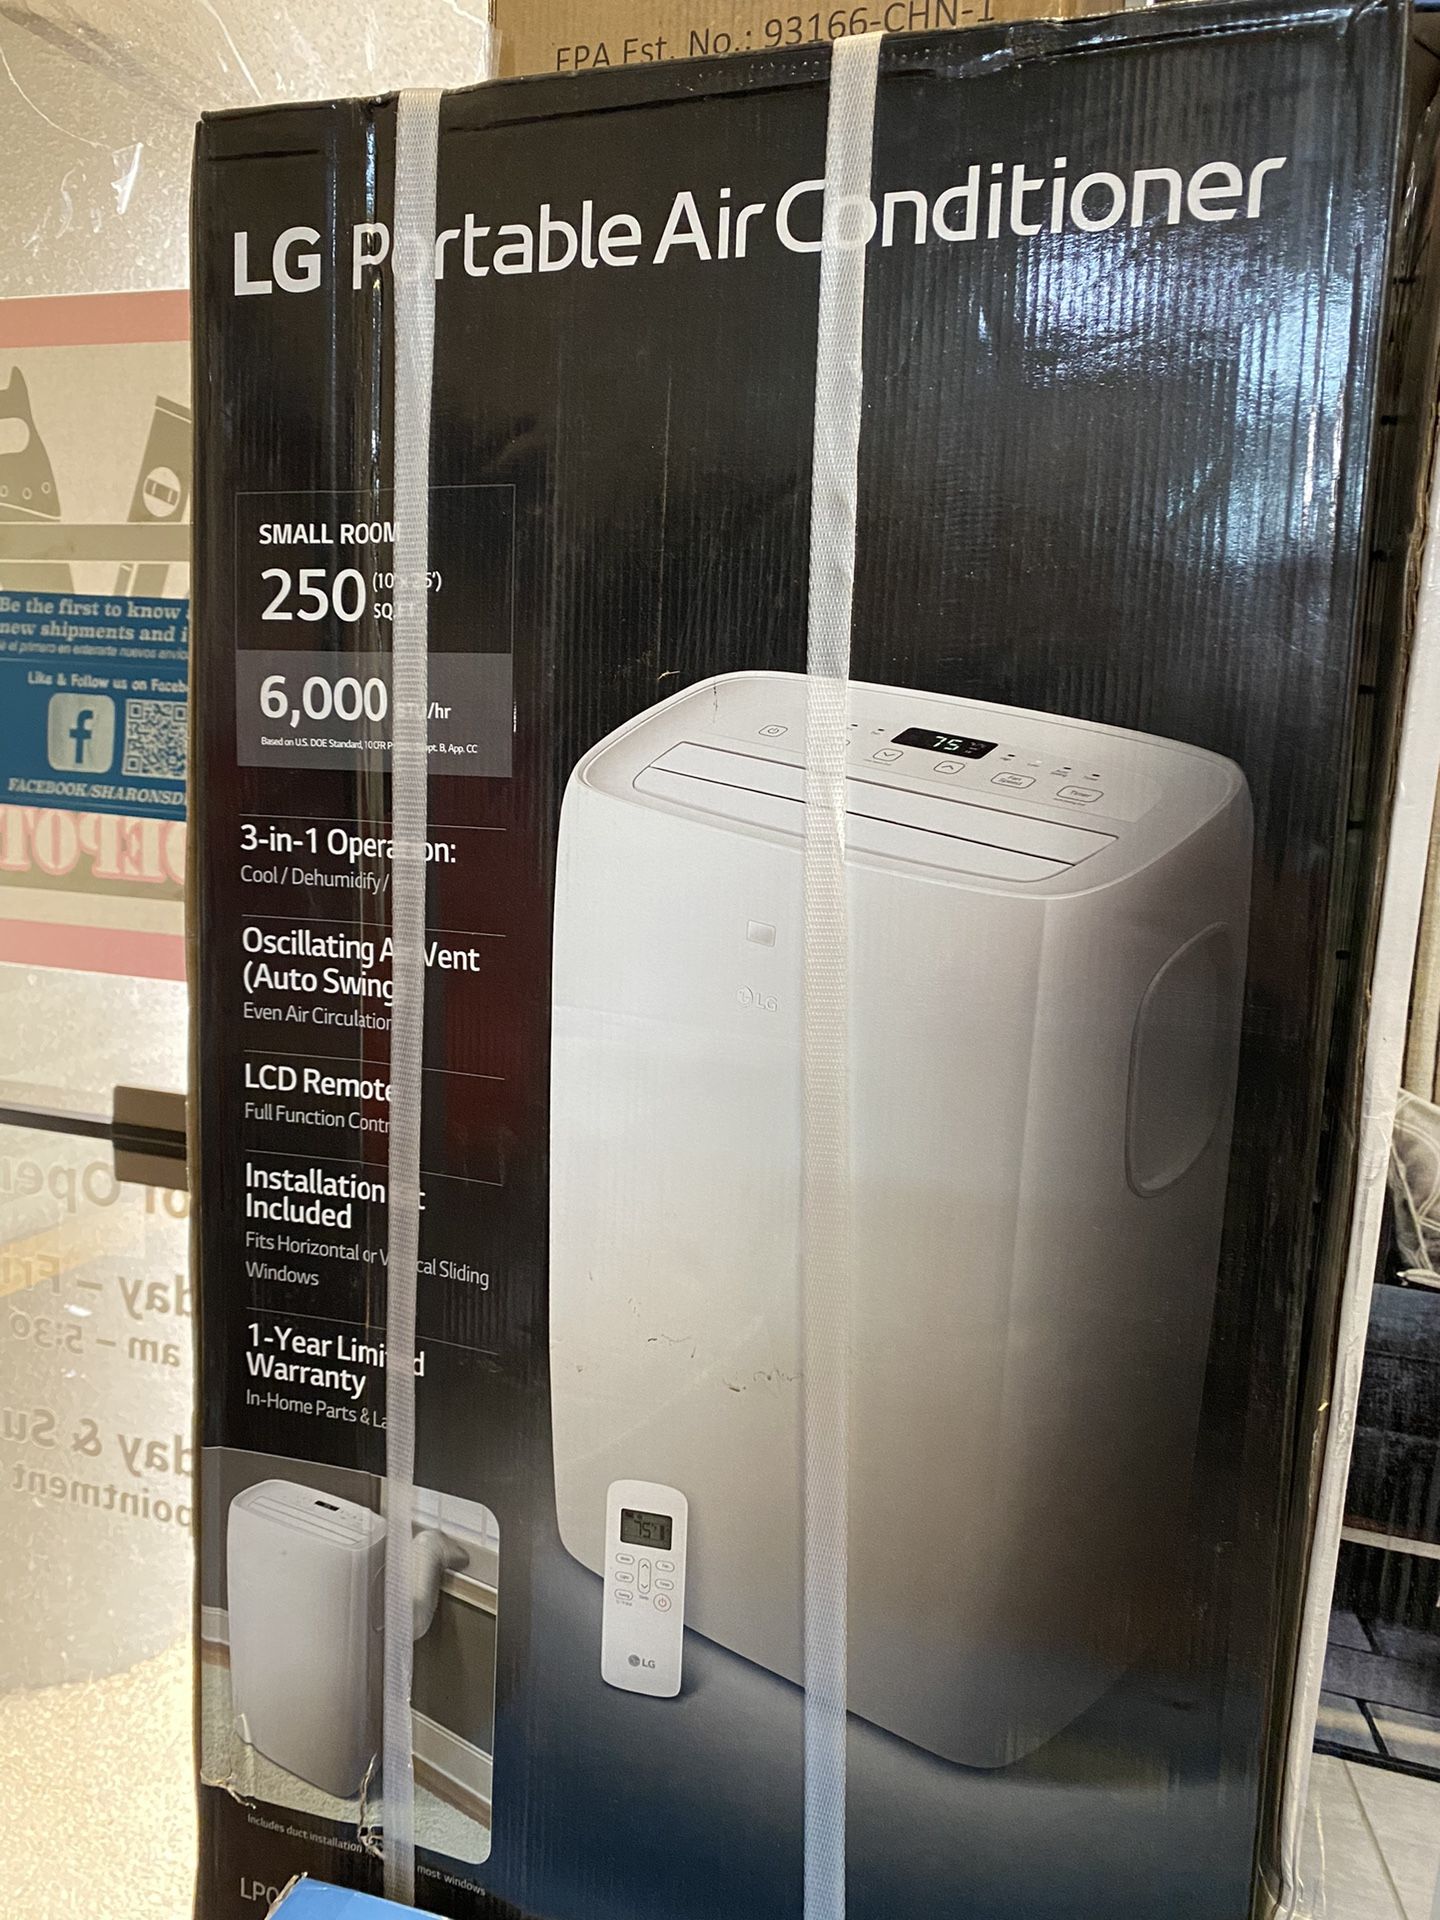 BRAND NEW LG 6,000 BTU Portable Air Conditioner Cools 250 Sq. Ft. with Dehumidifier in White